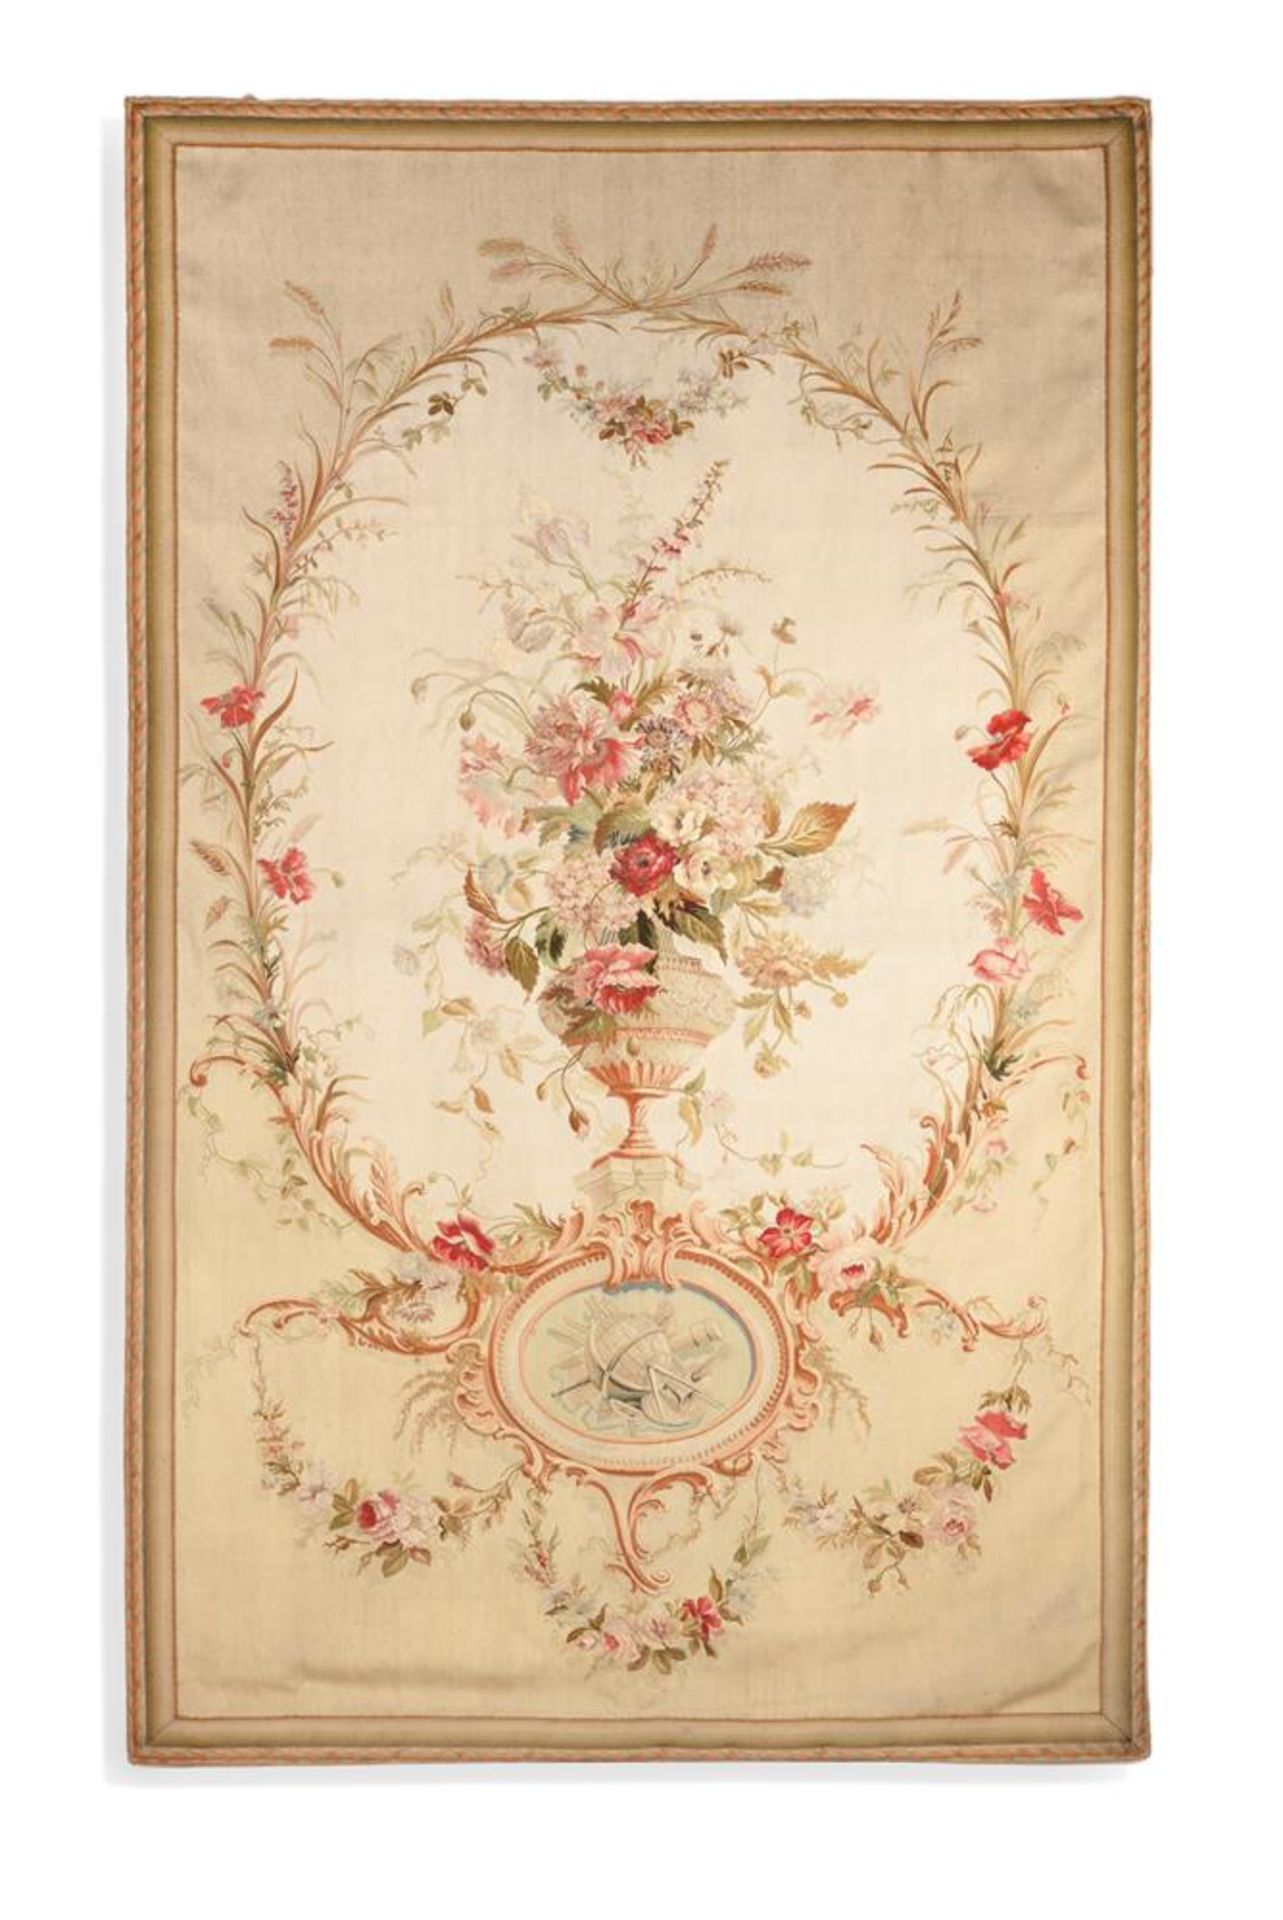 A PAIR OF AUBUSSON TAPESTRY PANELS, 19TH CENTURY - Image 6 of 6